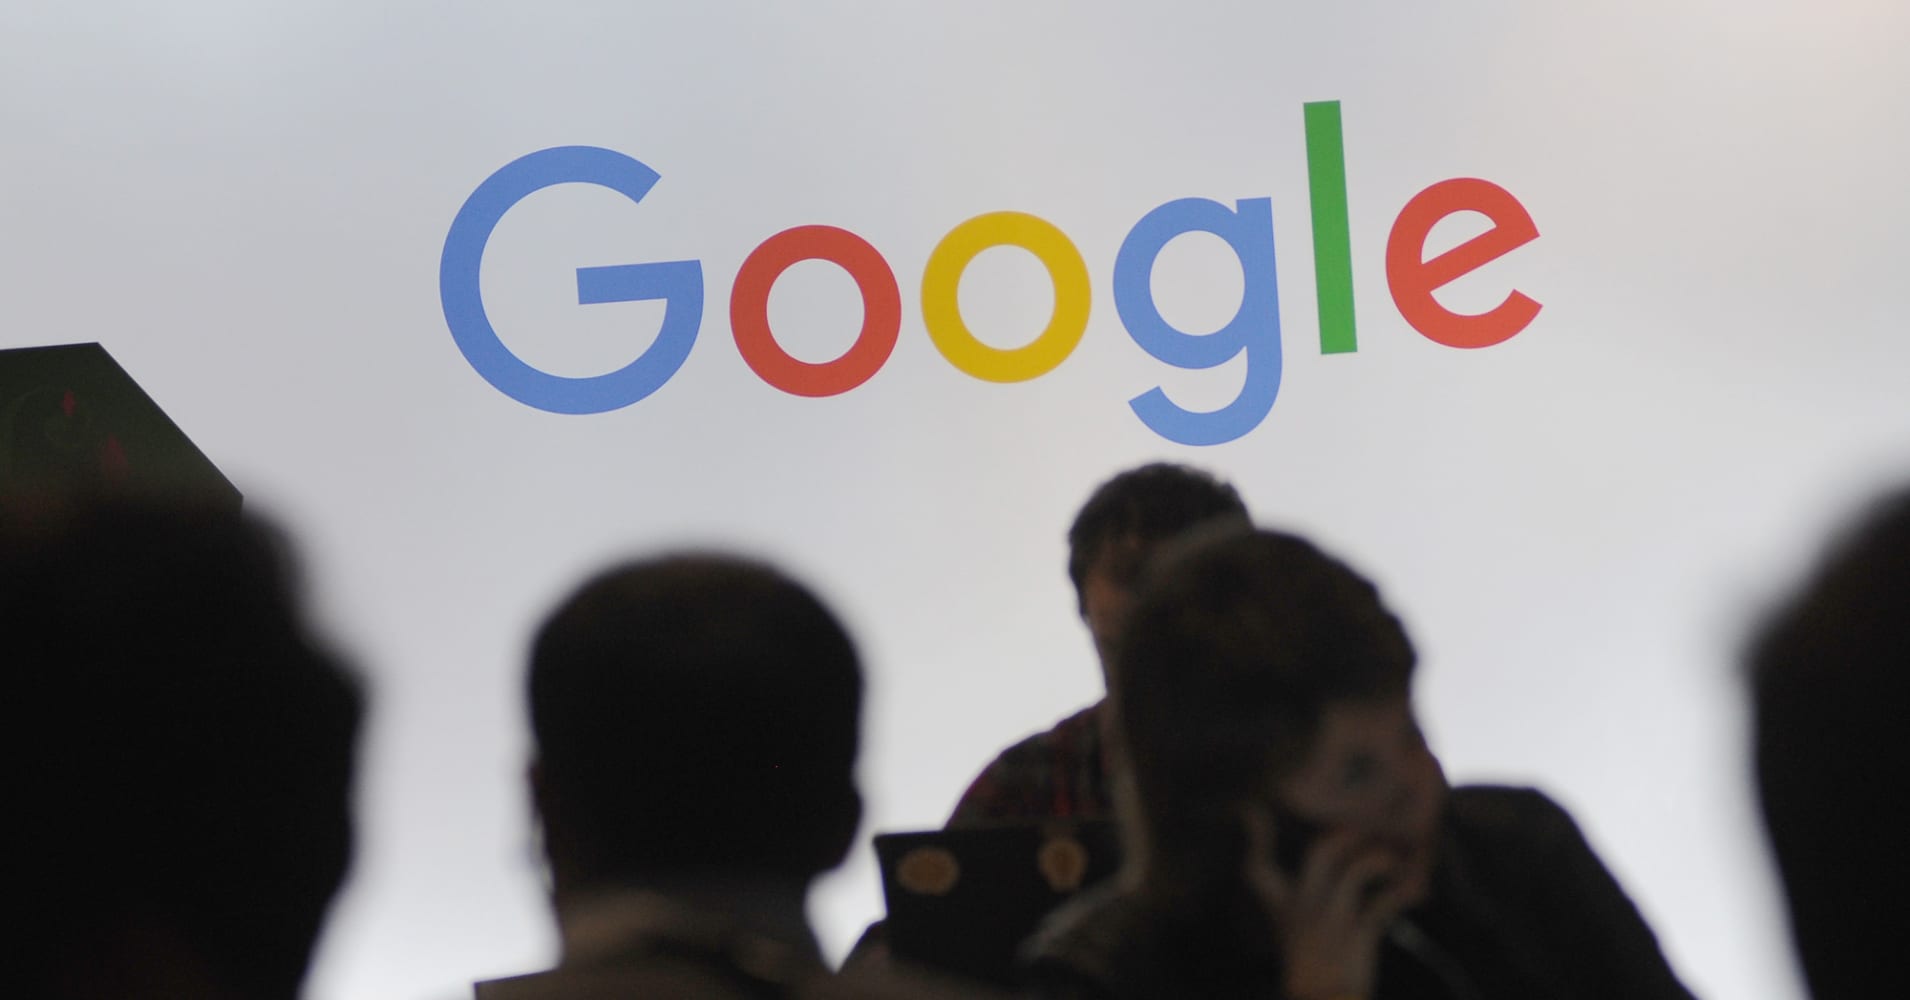 Why it may be illegal for Google to punish that engineer over his now viral anti-diversity memo